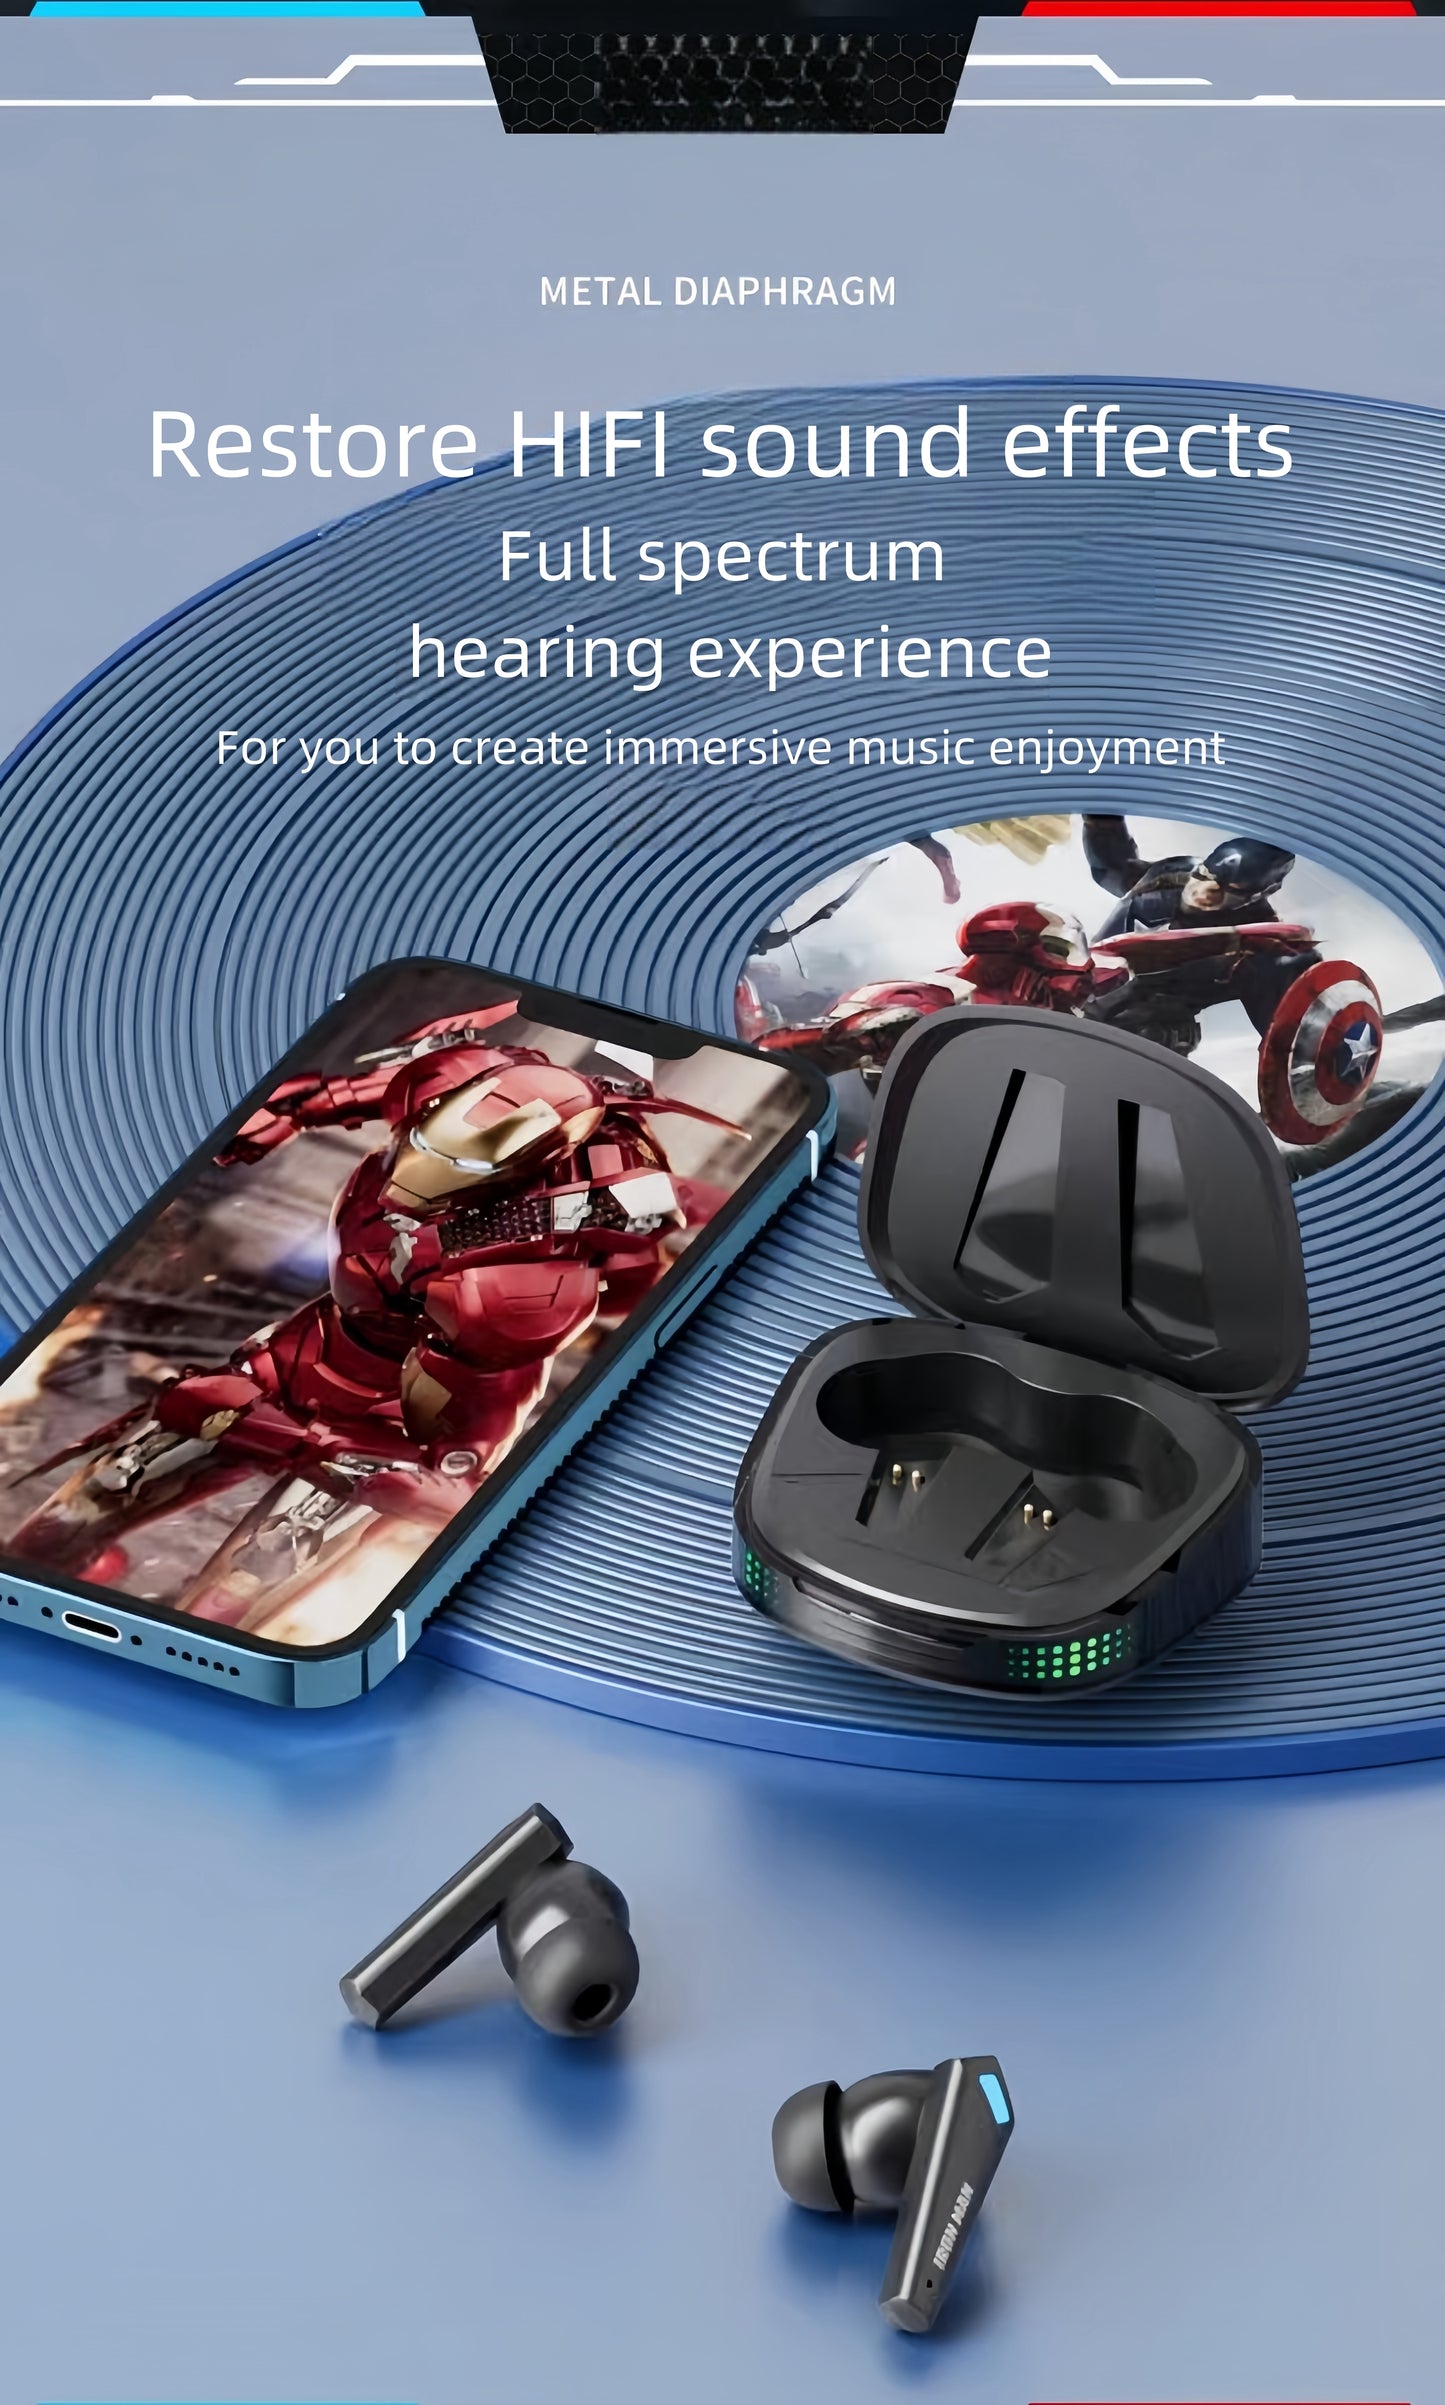 IRON MAN/HULK/CAPTAIN AMERICA MOBILE PHONE WIRELESS BLUETOOTH APPLE ANDROID UNIVERSAL ACTIVE NOISE REDUCTION HD SOUND QUALITY HEADSET EARPHONES